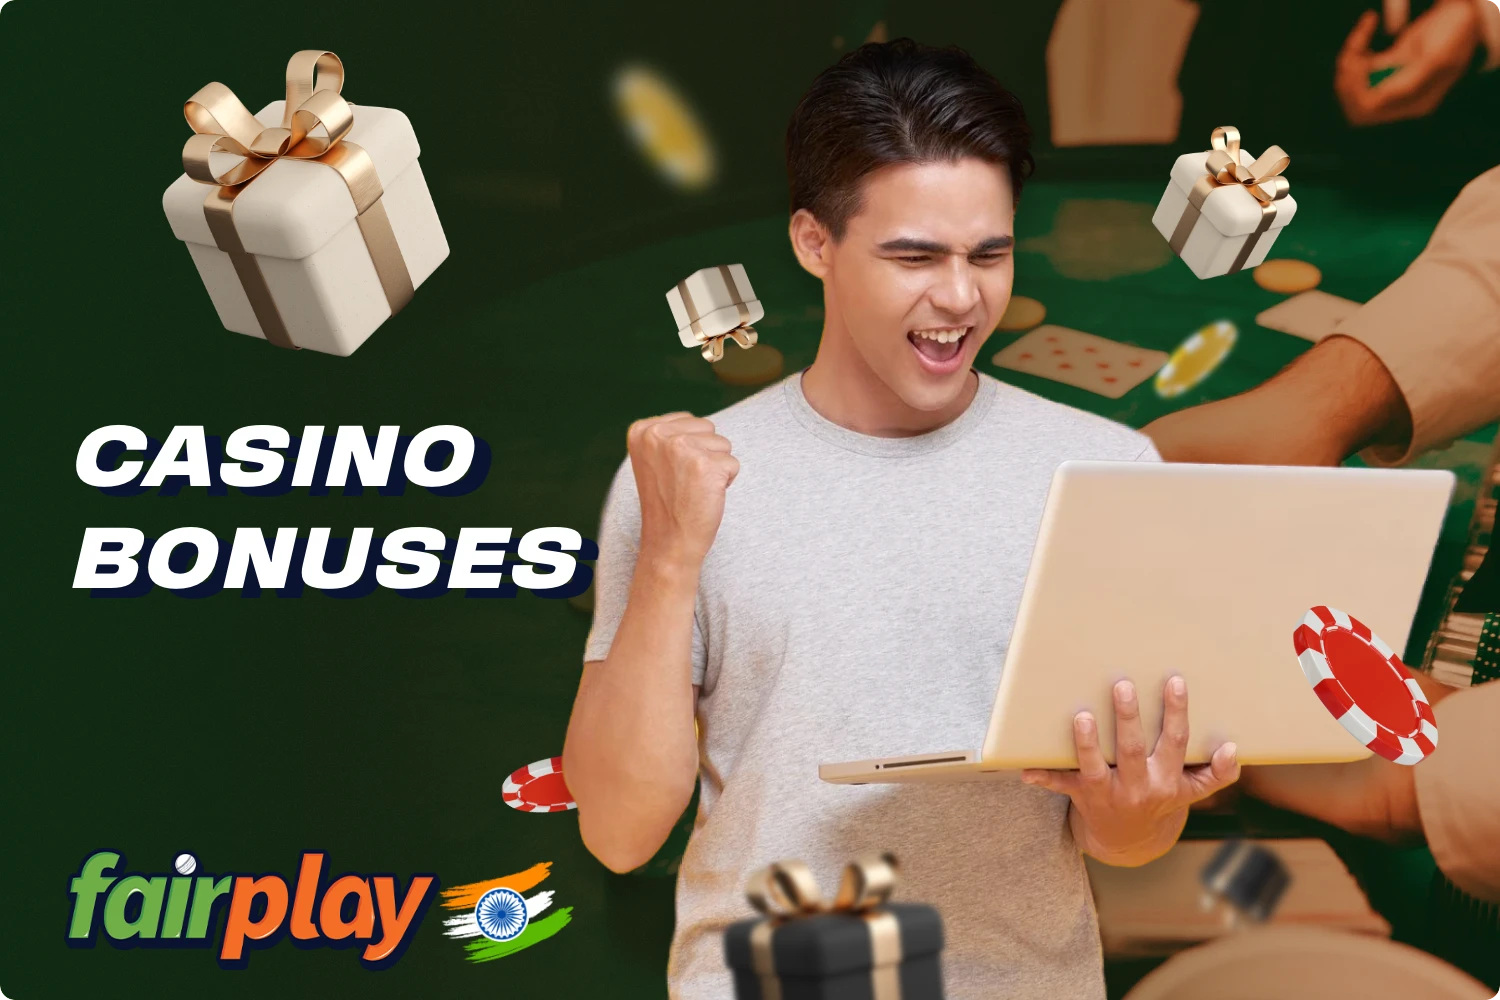 There are various bonuses and promotions for Fairplay casino users